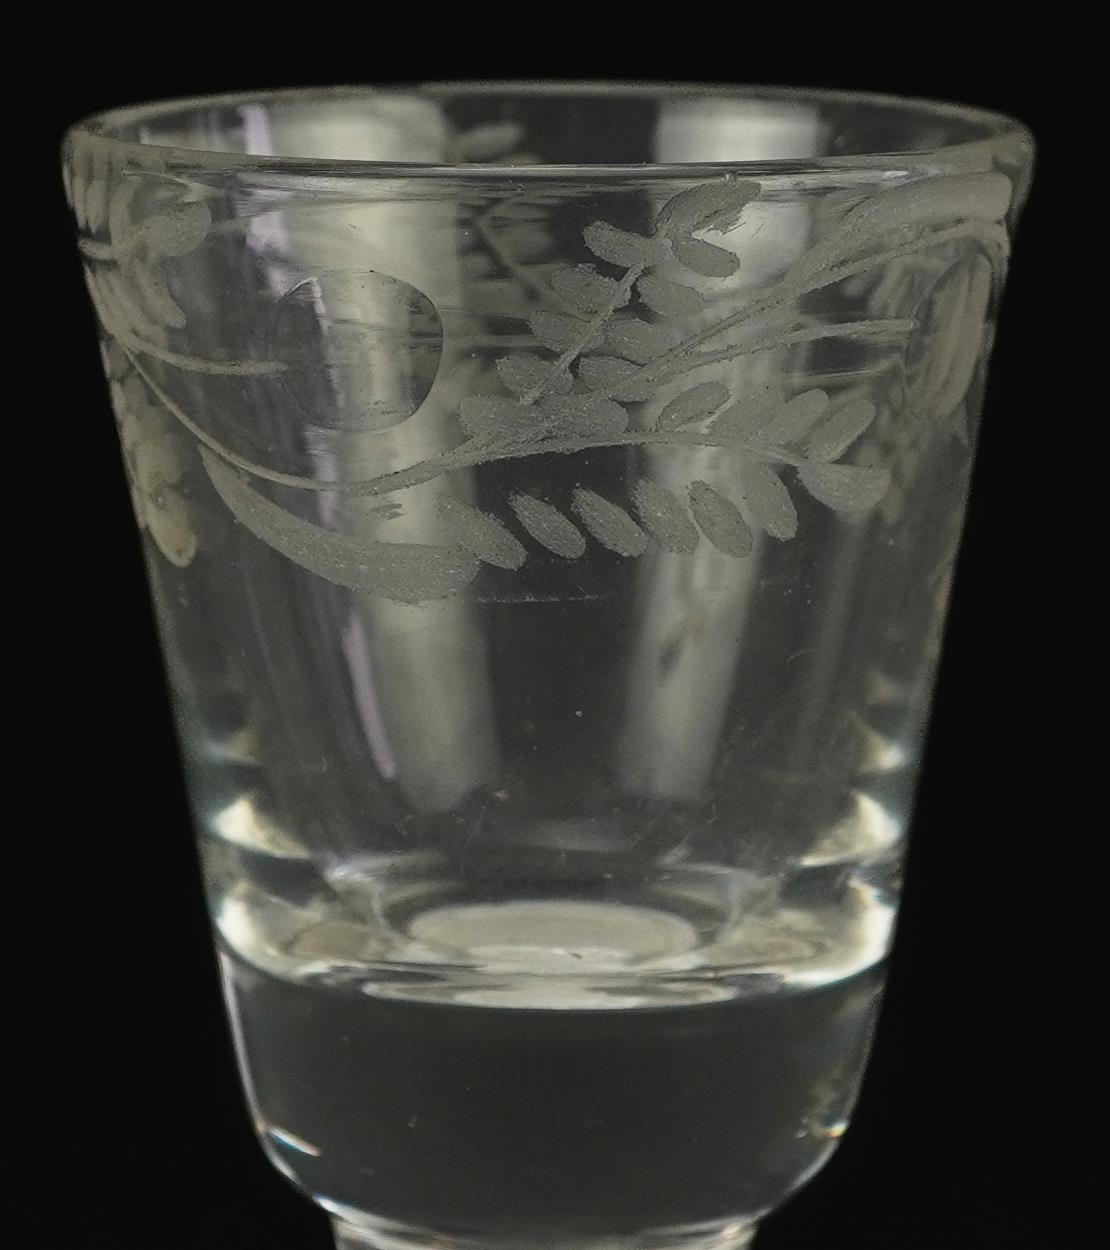 18th century cordial glass with multiple opaque twist stem and floral engraved bowl, 16.5cm high - Image 2 of 5